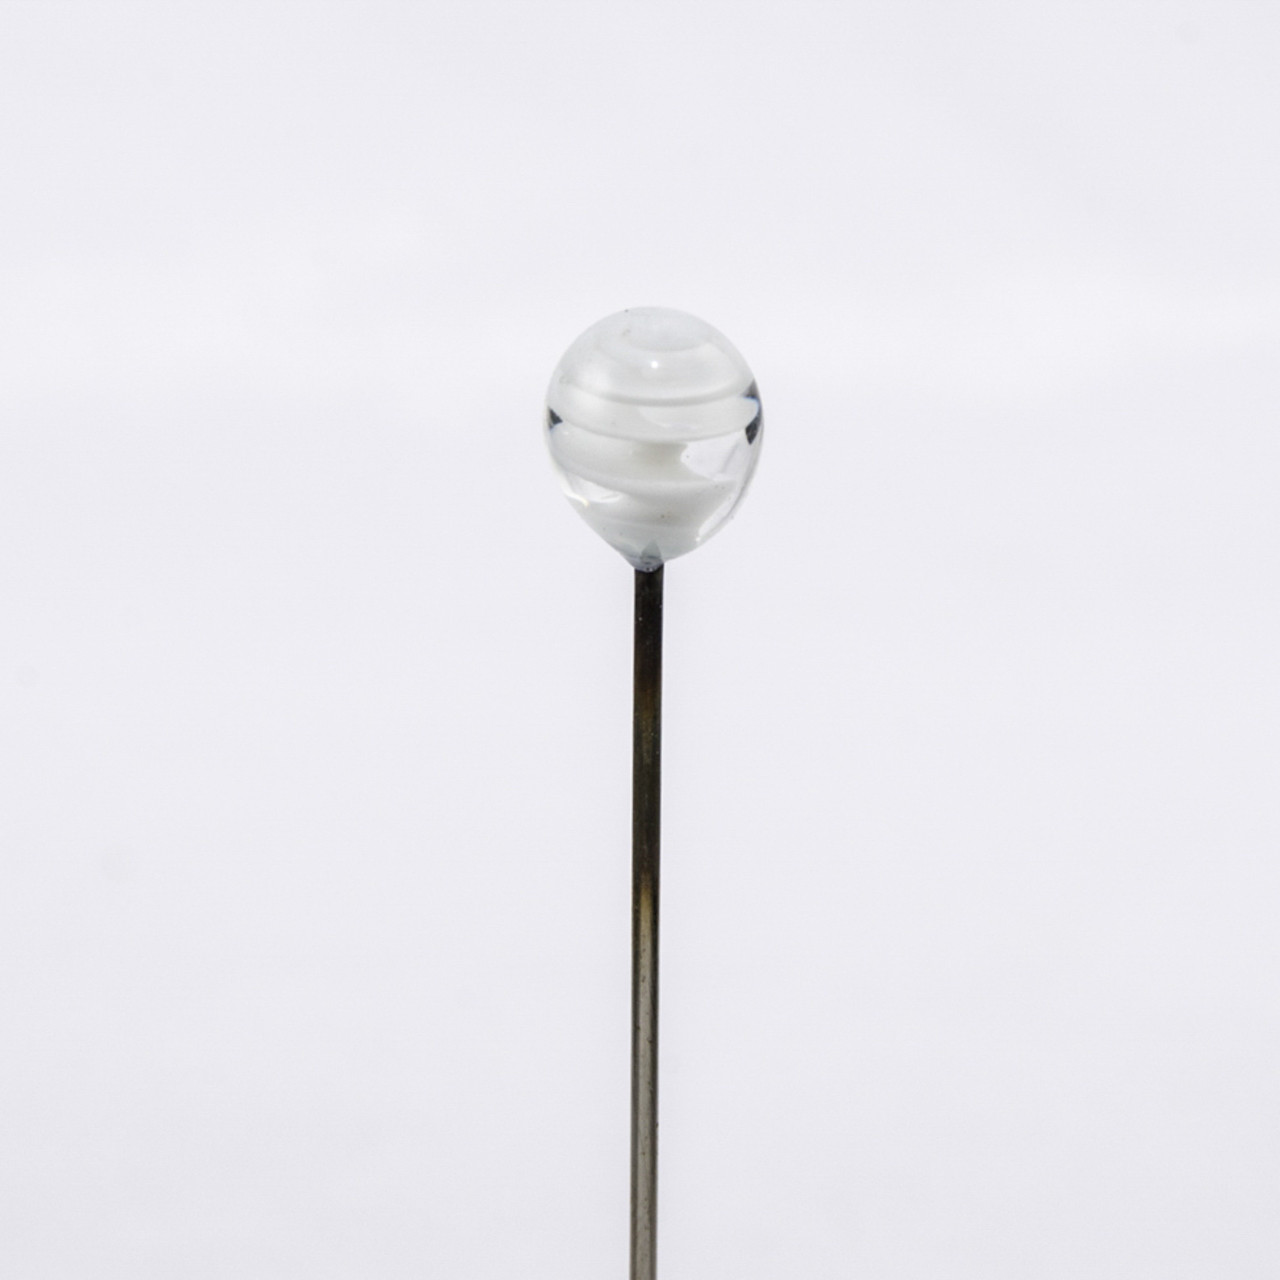 Marble Pick, Poker or Dab Tool